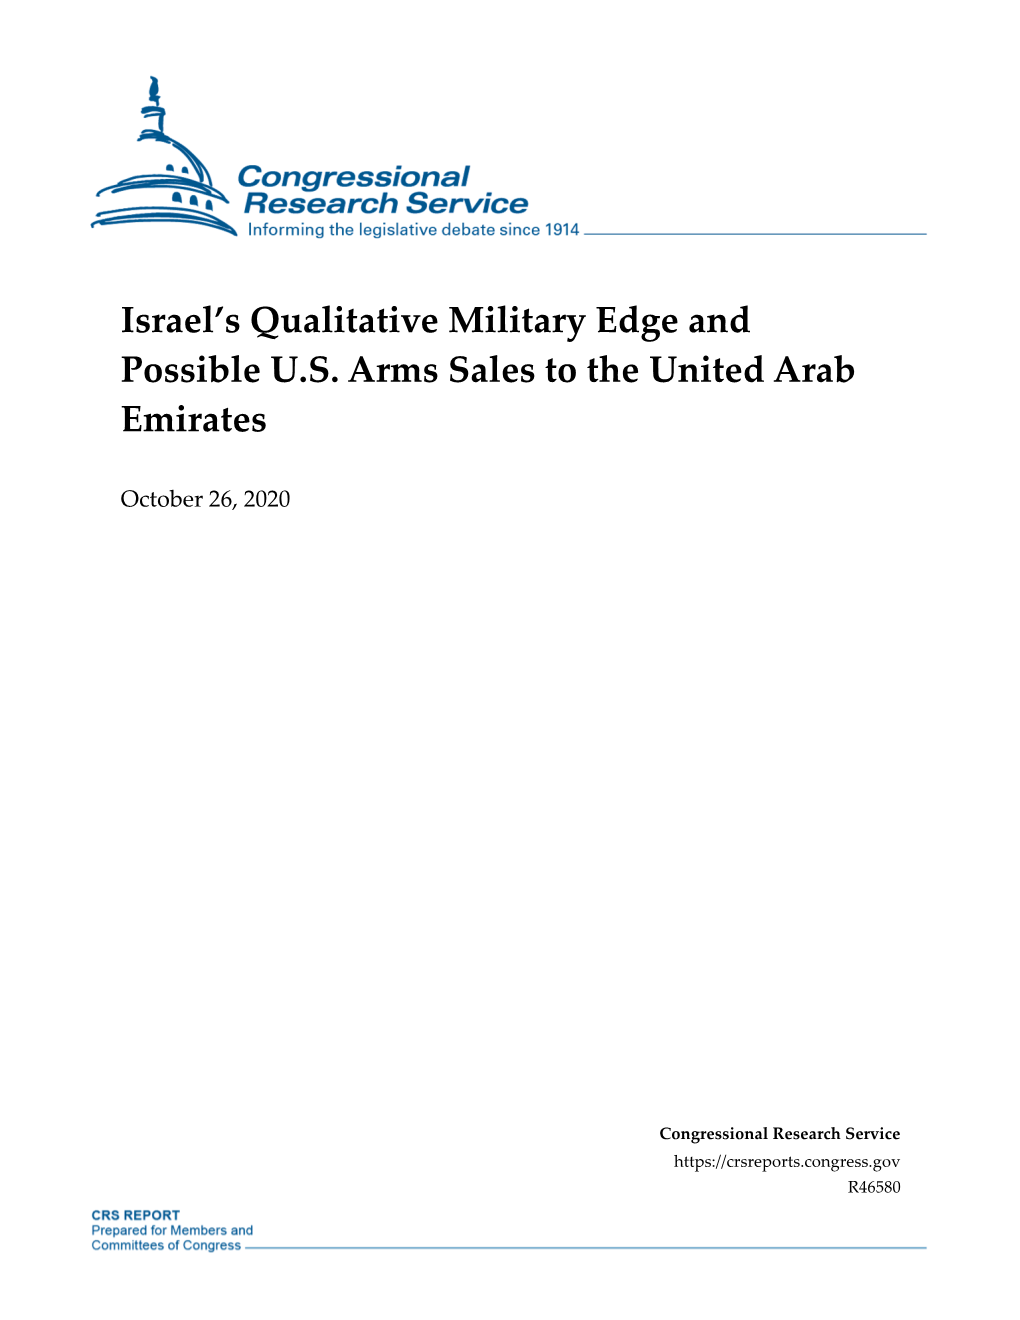 Israel's Qualitative Military Edge and Possible U.S. Arms